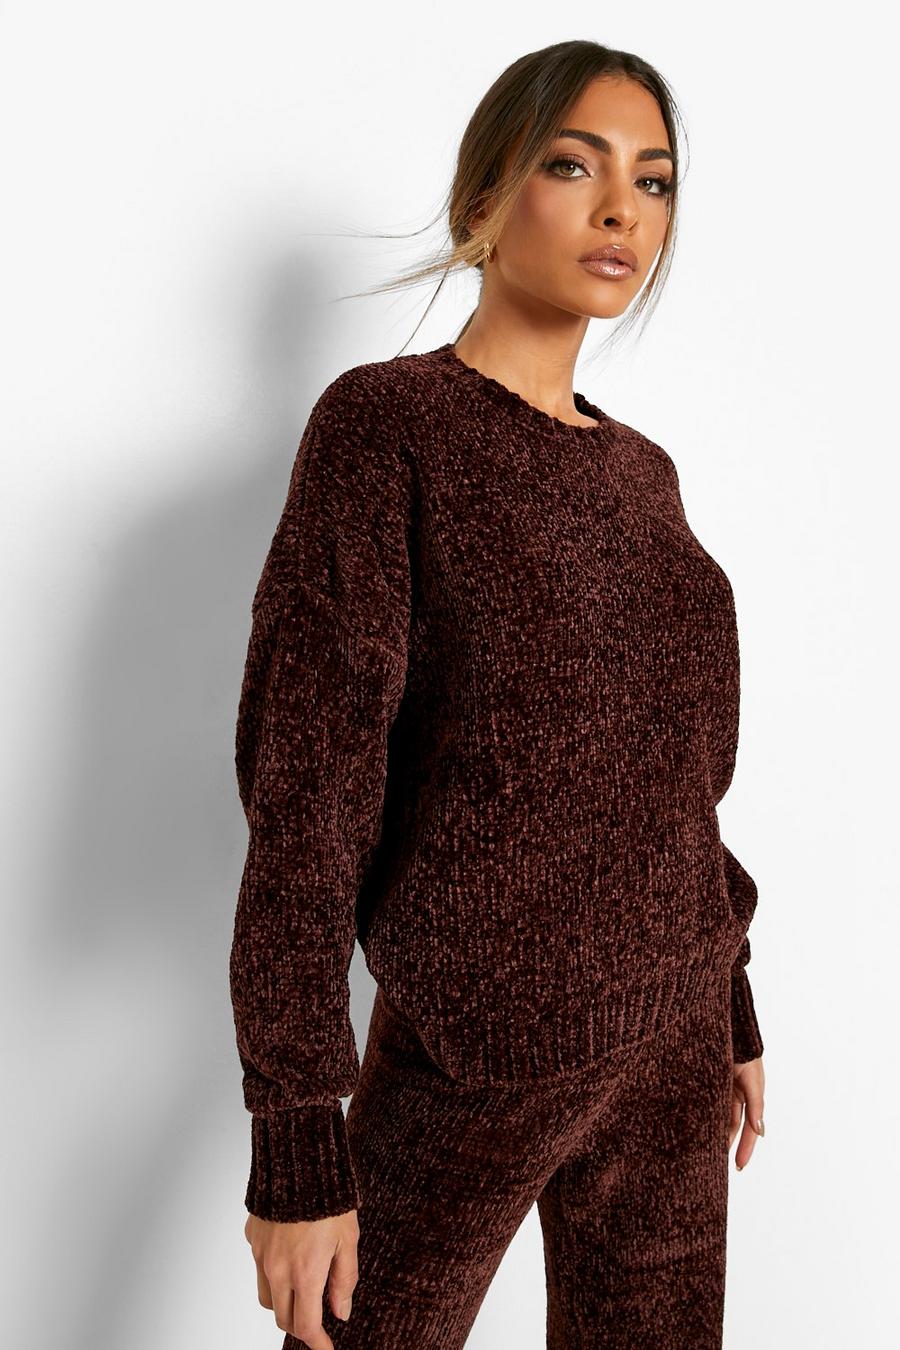 Chocolate brown Recycled Chenille Sweater